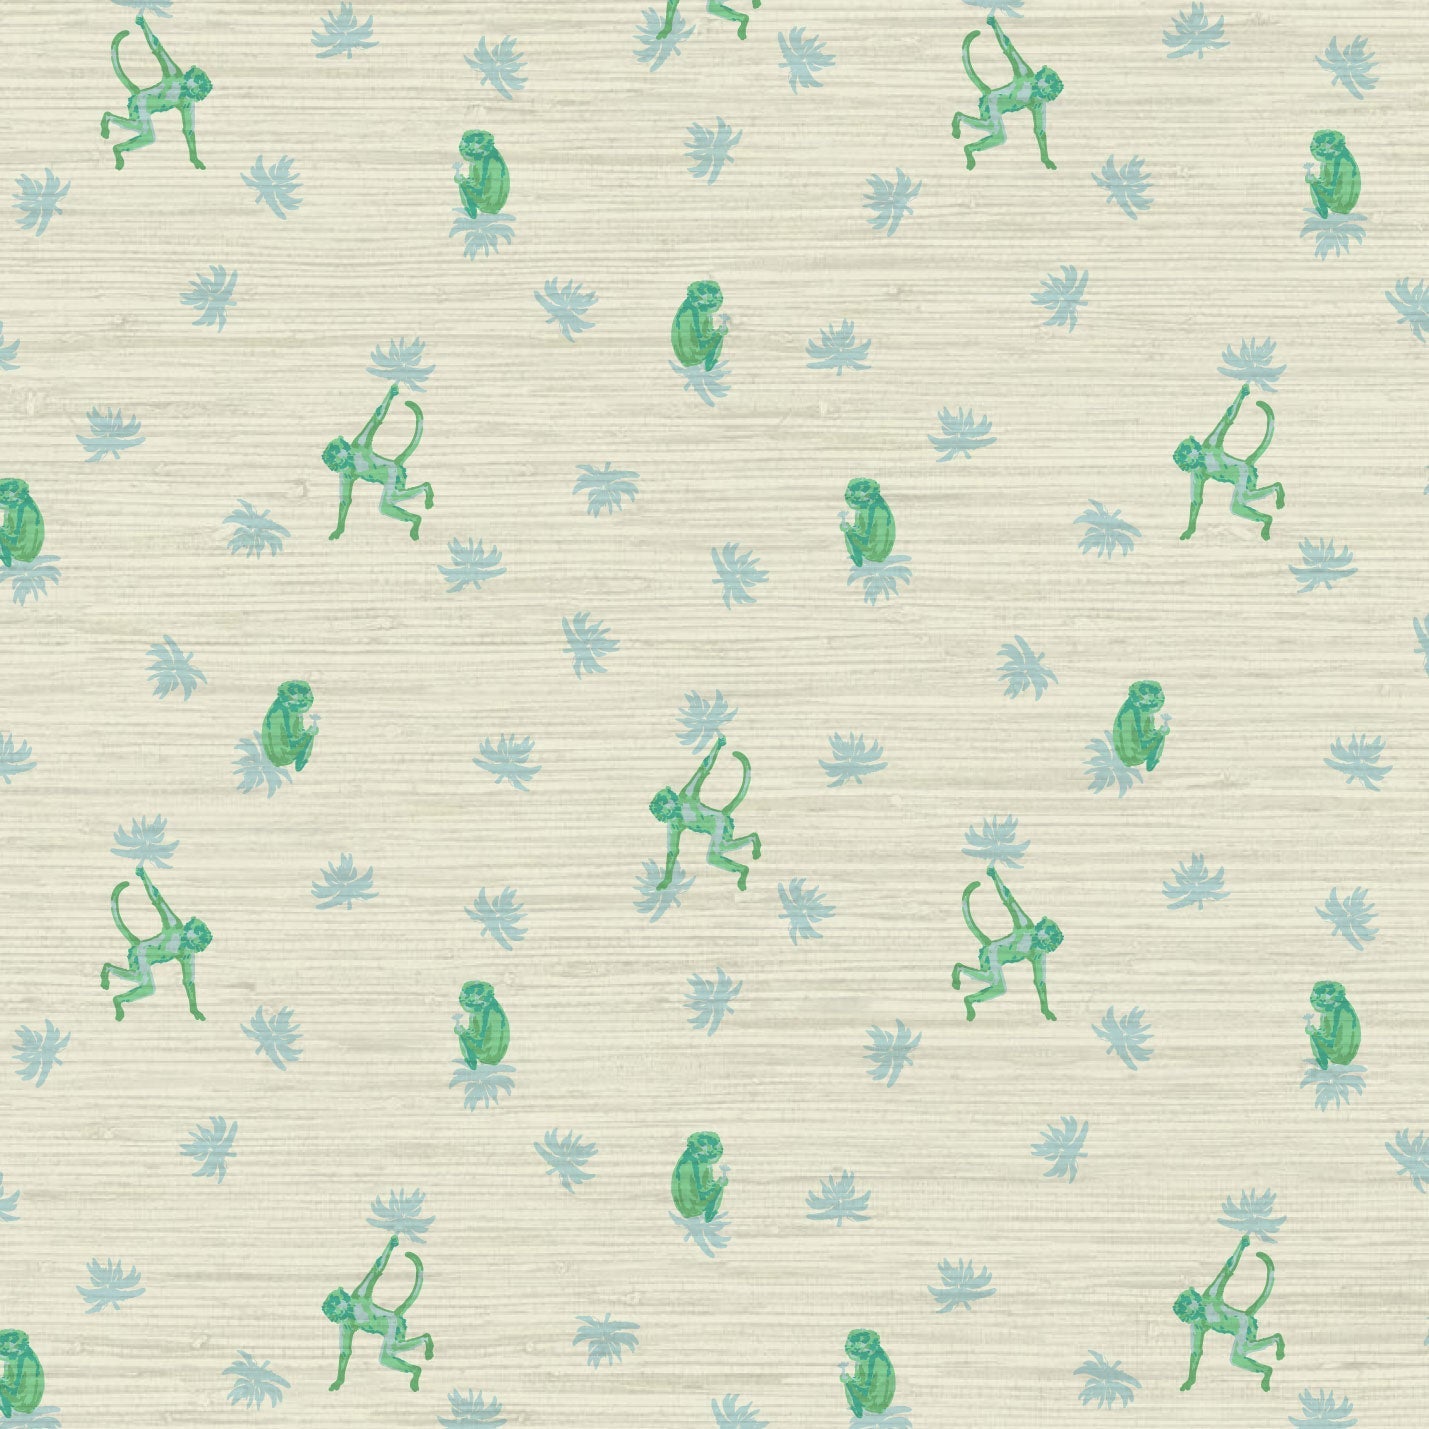 Grasscloth wallpaper Natural Textured Eco-Friendly Non-toxic High-quality  Sustainable Interior Design Bold Custom Tailor-made Retro chic Grandmillennial Maximalism  Traditional Dopamine decor tropical jungle kid playroom animal monkey chintz chinoiserie preppy playroom nursery bathroom french blue green mint white cream neutral mini icon